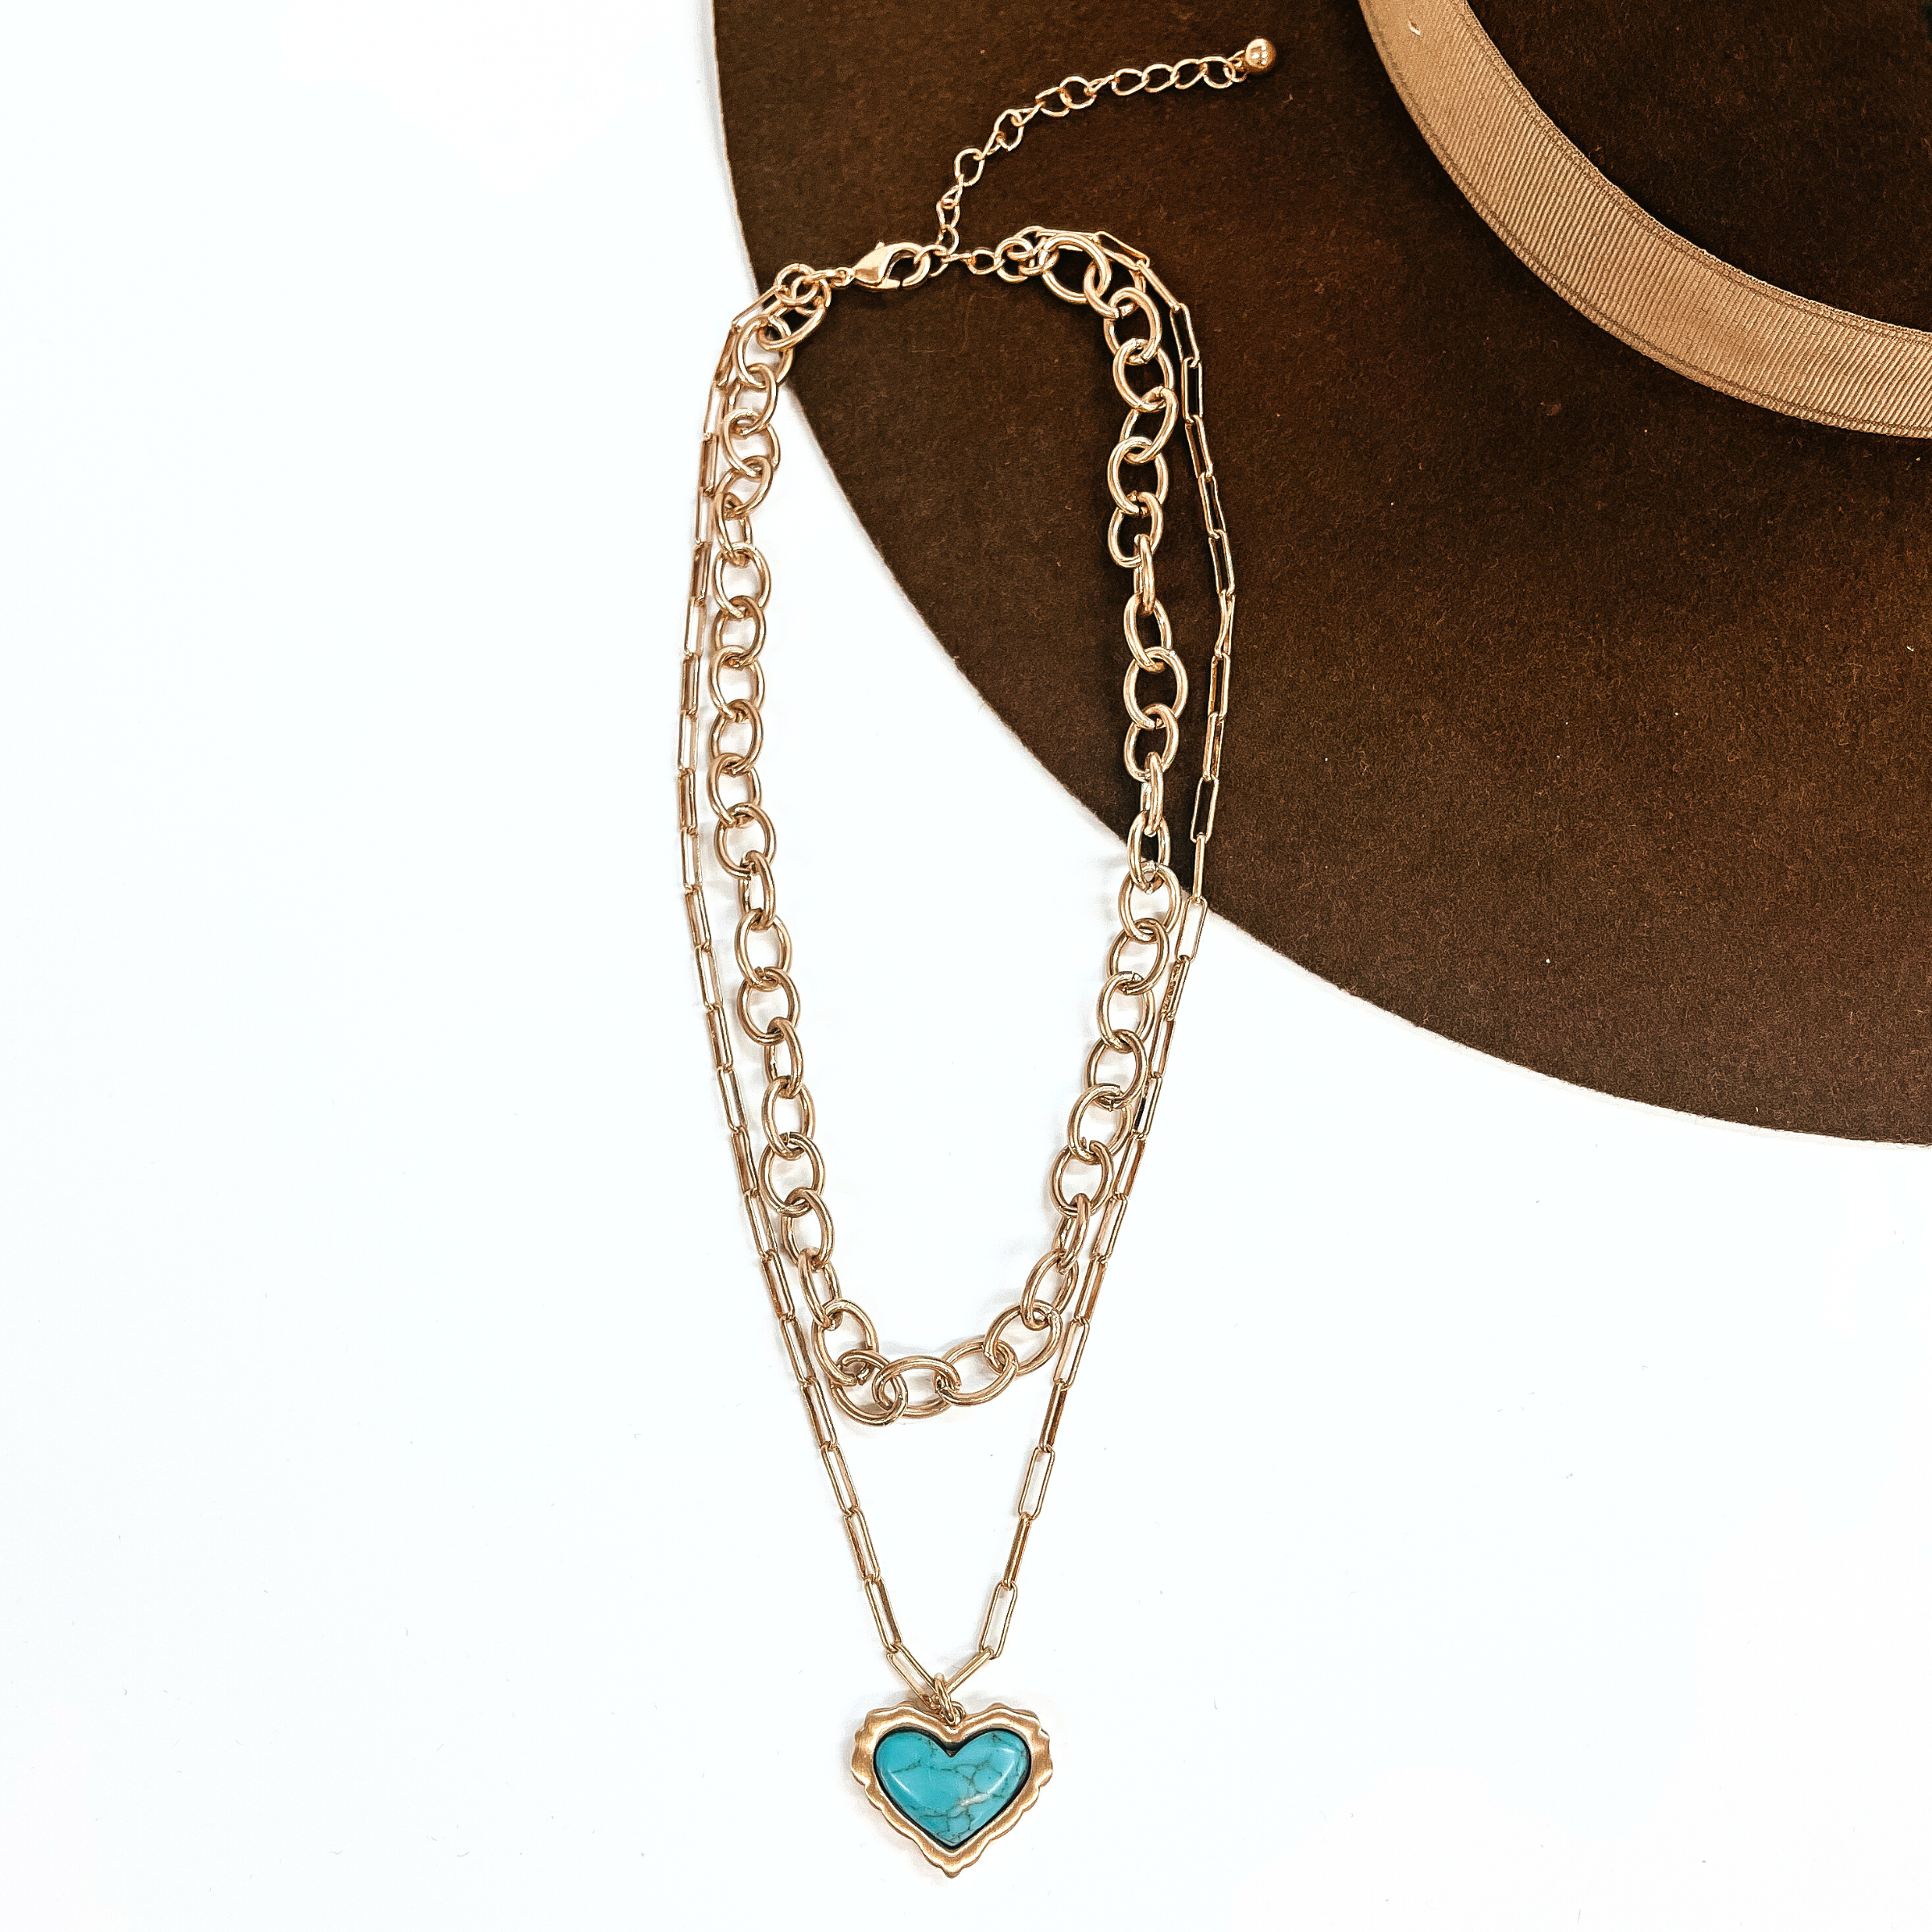 This is a two strand matte gold tone chained necklace with a heart pendant. The small  strand is a small,thick link chain and the long strand is a thin small linked chain with  a turquoise heart stone in a gold setting. This necklace is taken on a white background  and on a dark brown felt hat brim.